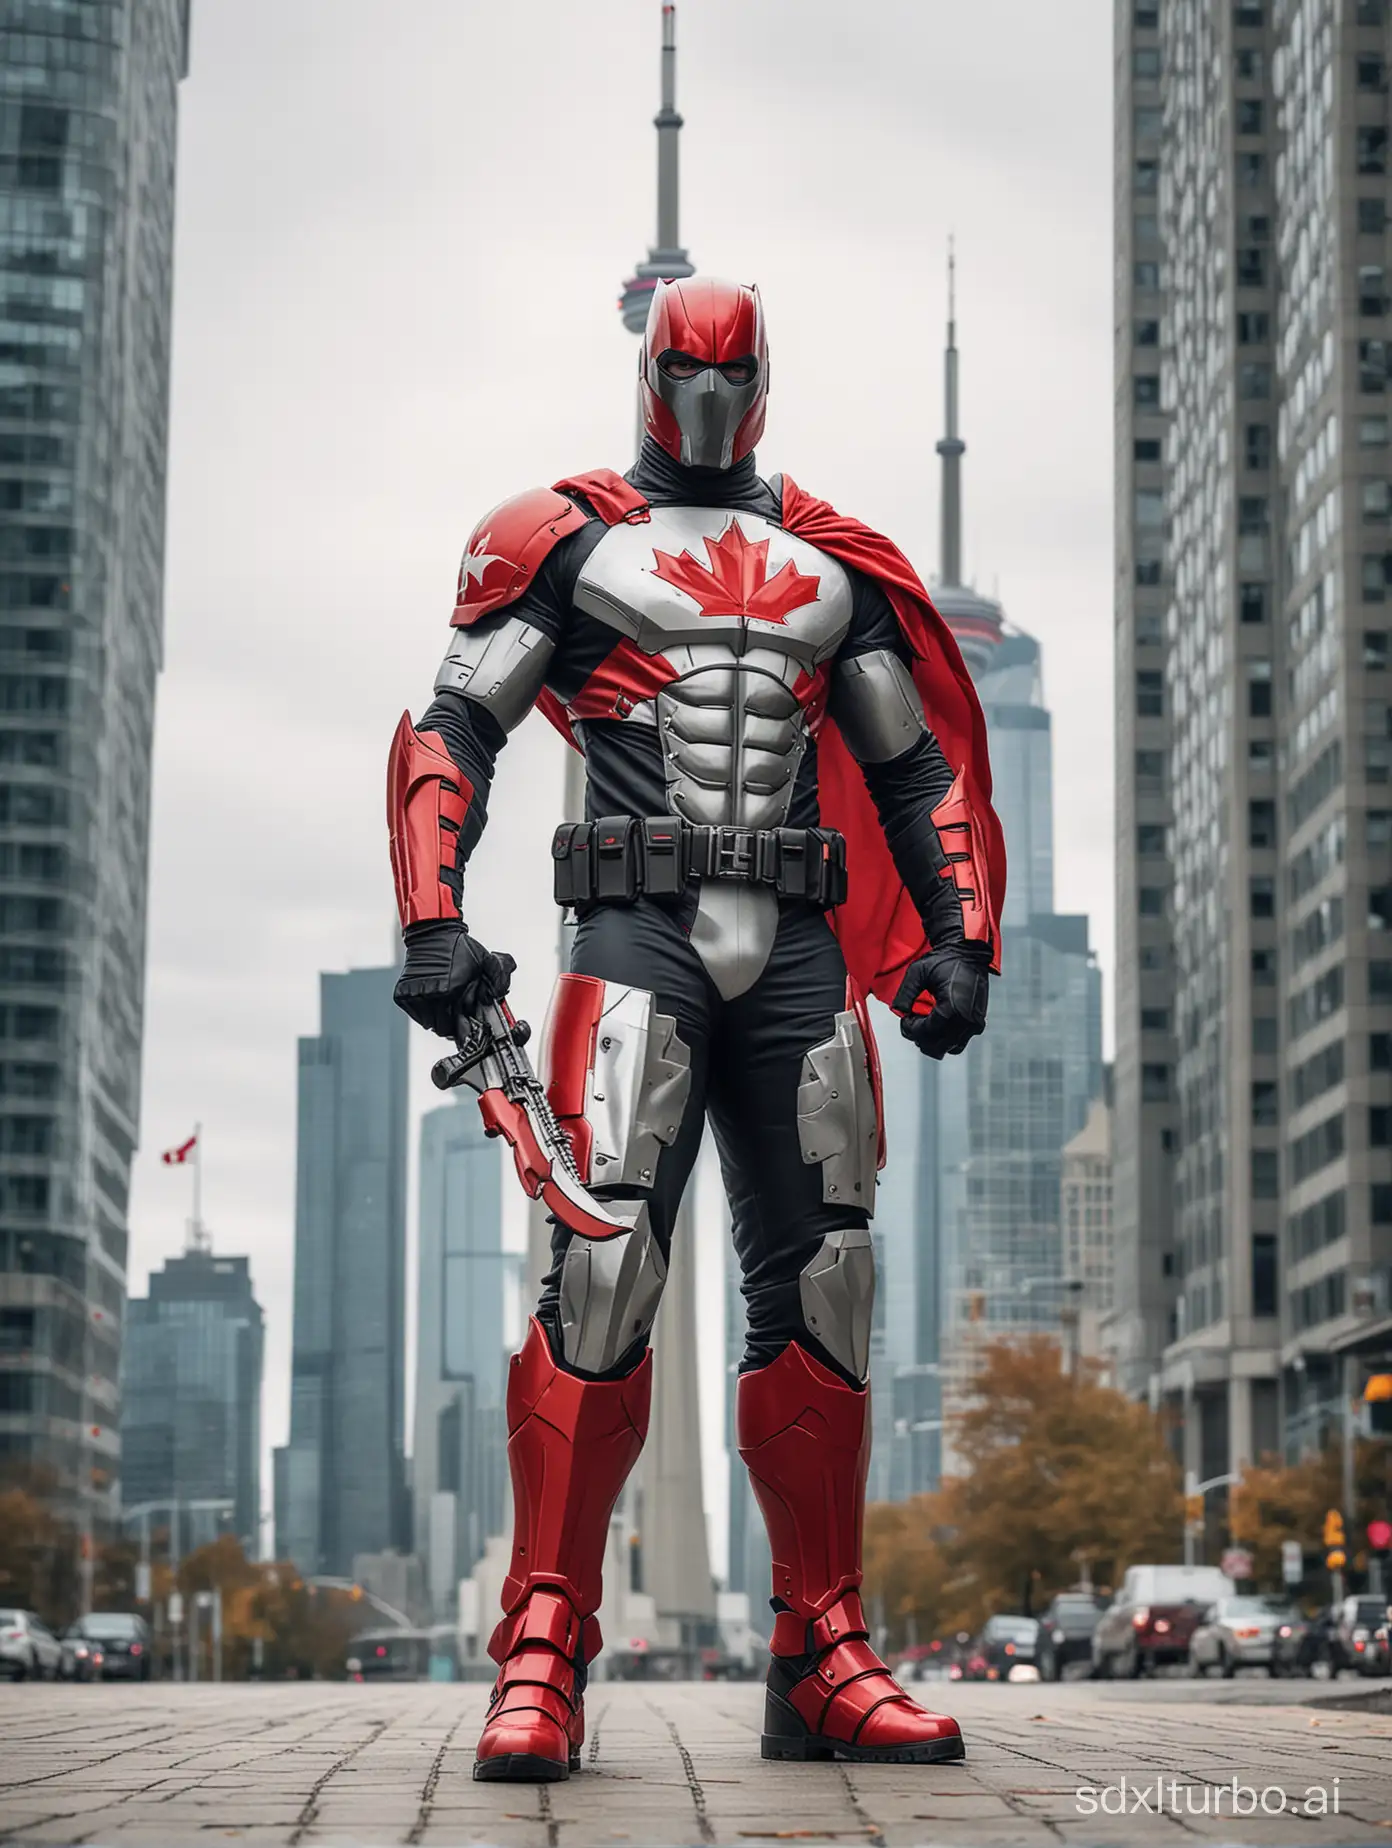 create a canadian superhero with armoured costume in canadian flag colours . The superhero should be wearing cape made up of canadian. He should be holding weapon and he’s standing outside CN tower canada